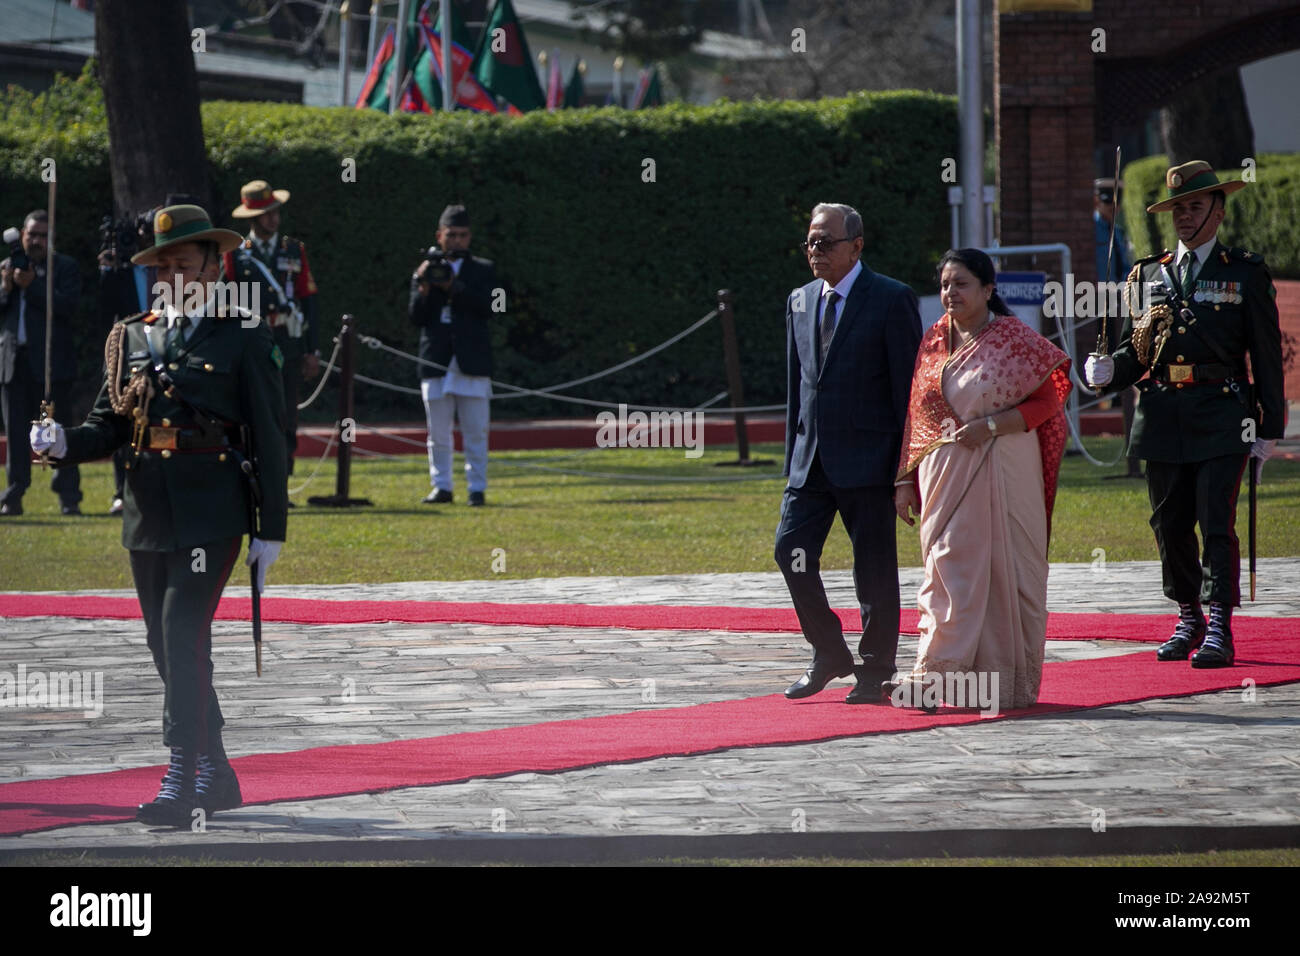 Kathmandu, Nepal. 20th Nov, 2019. President of Bangladesh, Abdul Hamid (C, left) and Nepal's President, Bidhya Devi Bhandari (C, right) Received by the guard of honour during a welcome ceremony at Tribhuvan International Airport. President of Bangladesh is on a three-day official goodwill visit to Nepal at the invitation of Nepal's President. Credit: SOPA Images Limited/Alamy Live News Stock Photo